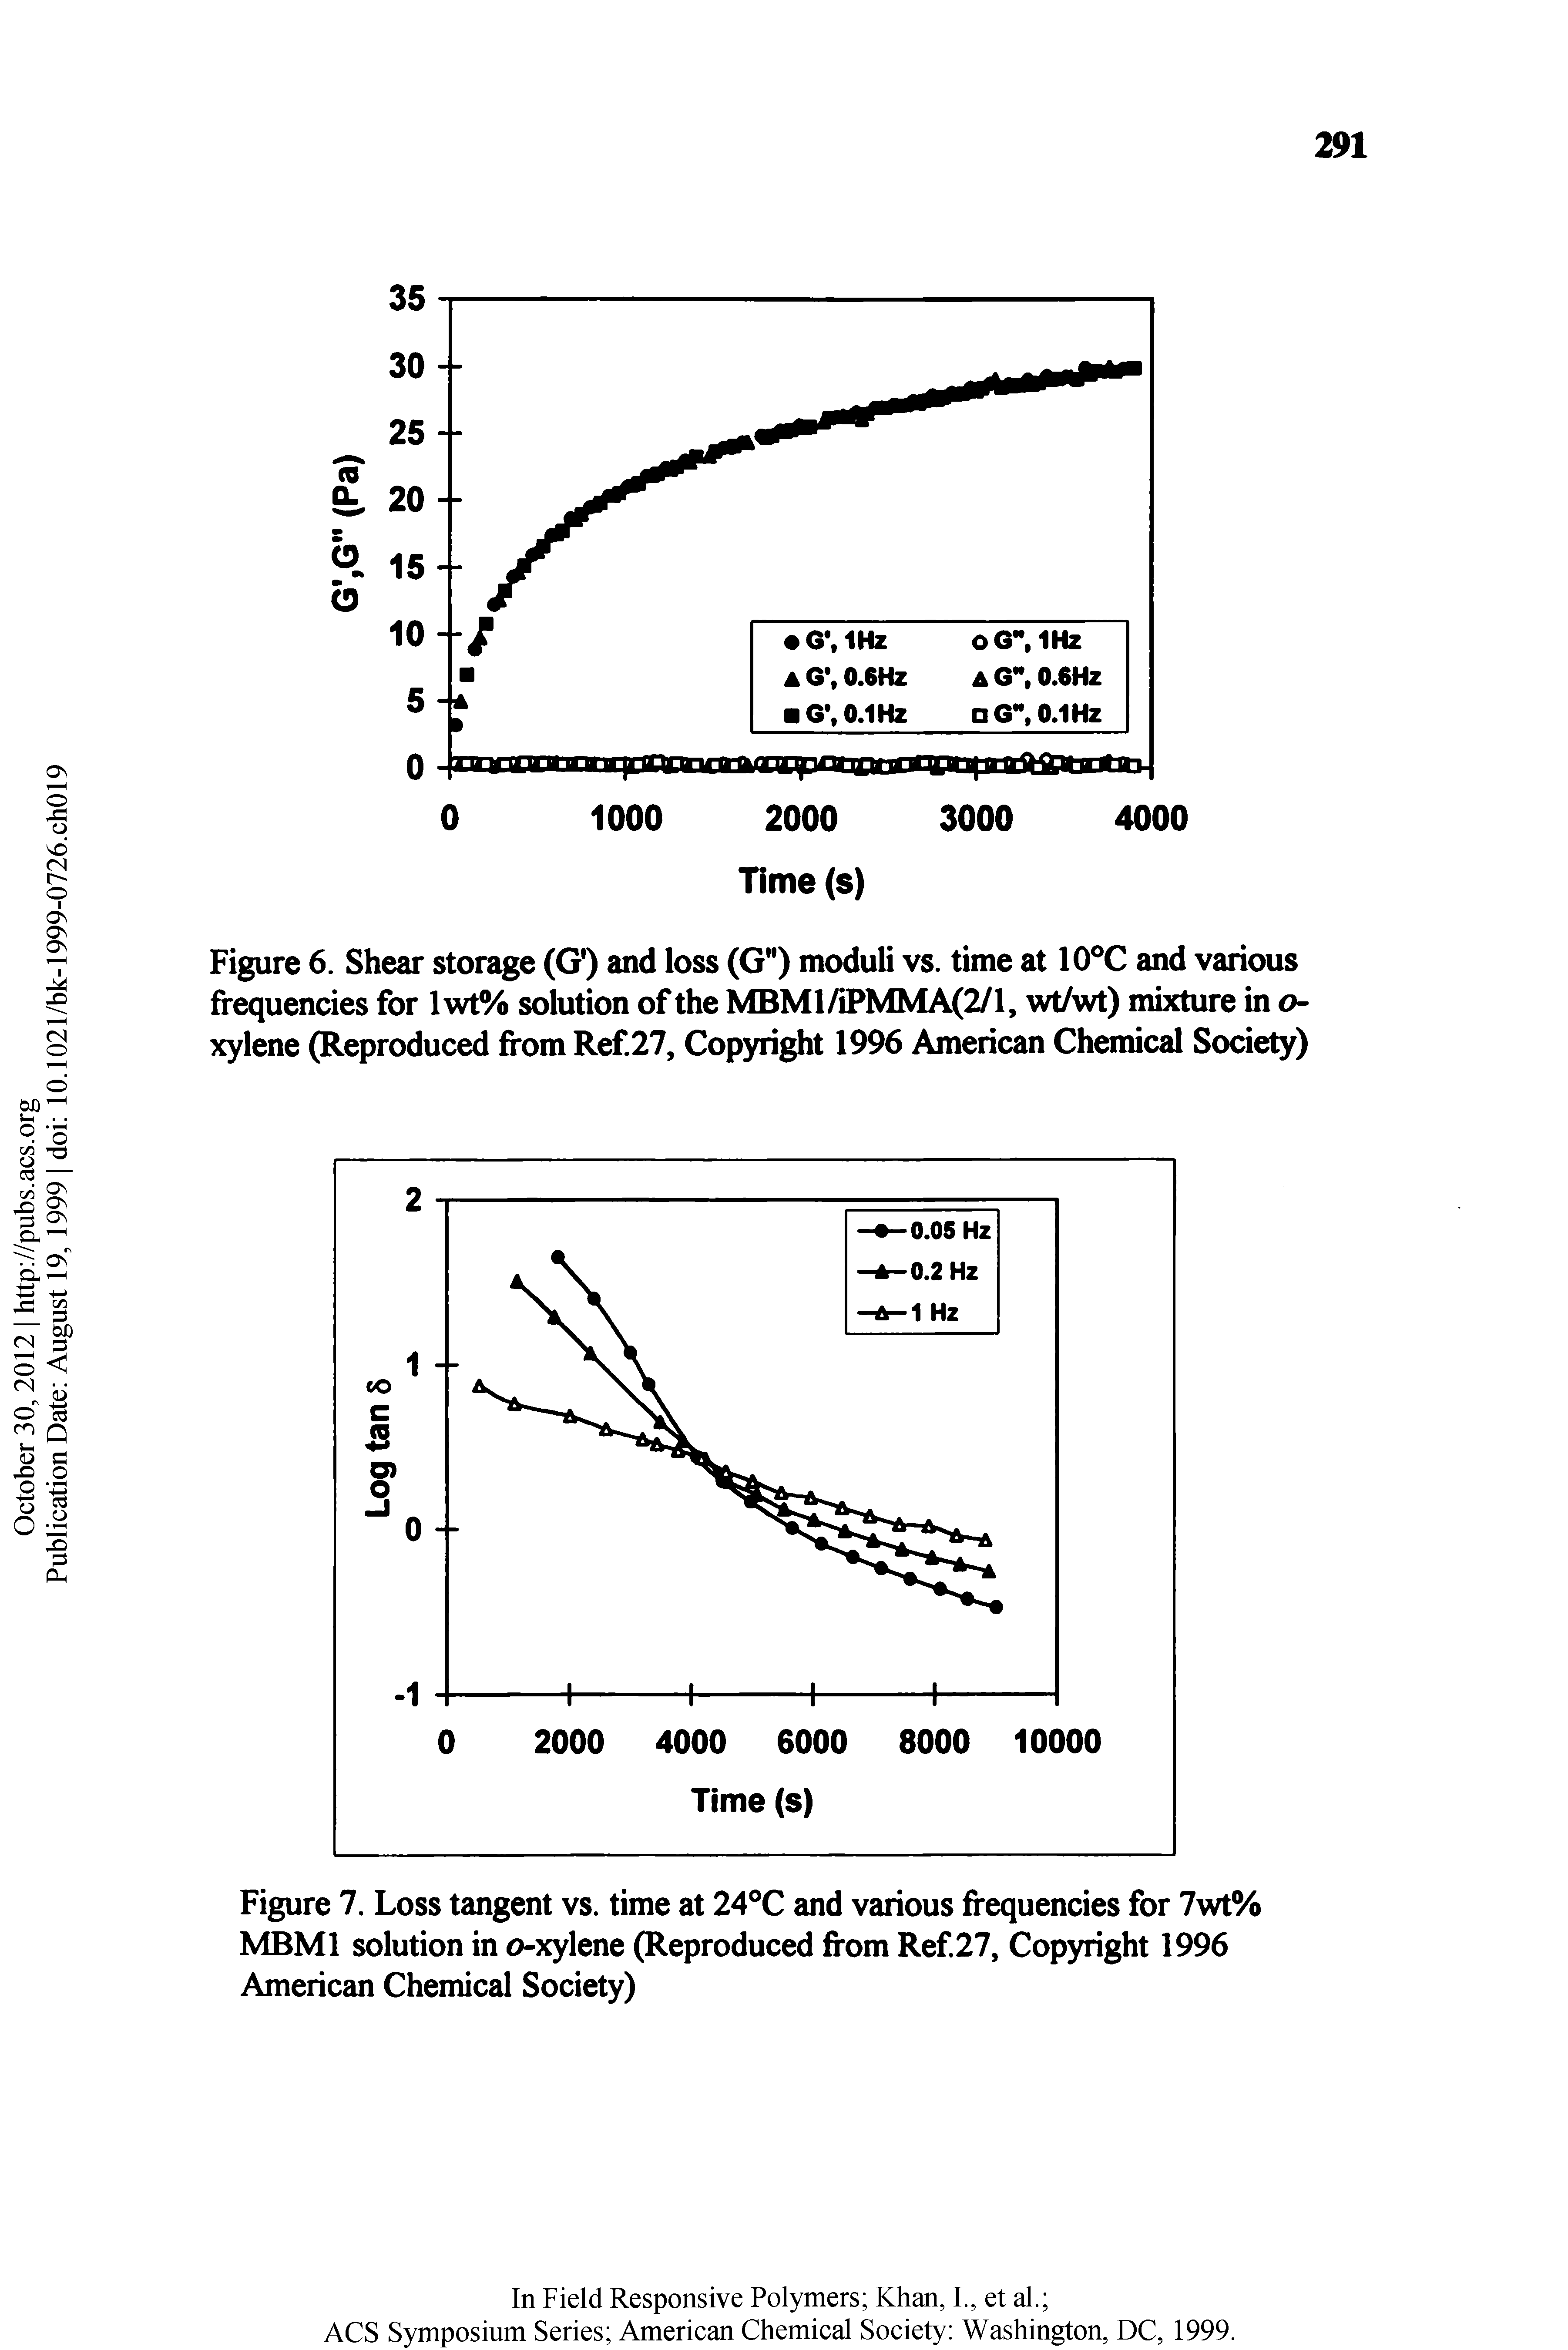 Figure 6. Shear storage (G ) and loss (G ) moduli vs. time at lOX and various frequencies for lwt% solution of the MBM1 MMA(2/1, wtAvt) mixture in o-xylene (Reproduced from Ref 27, Copyright 1996 American Chemical Society)...